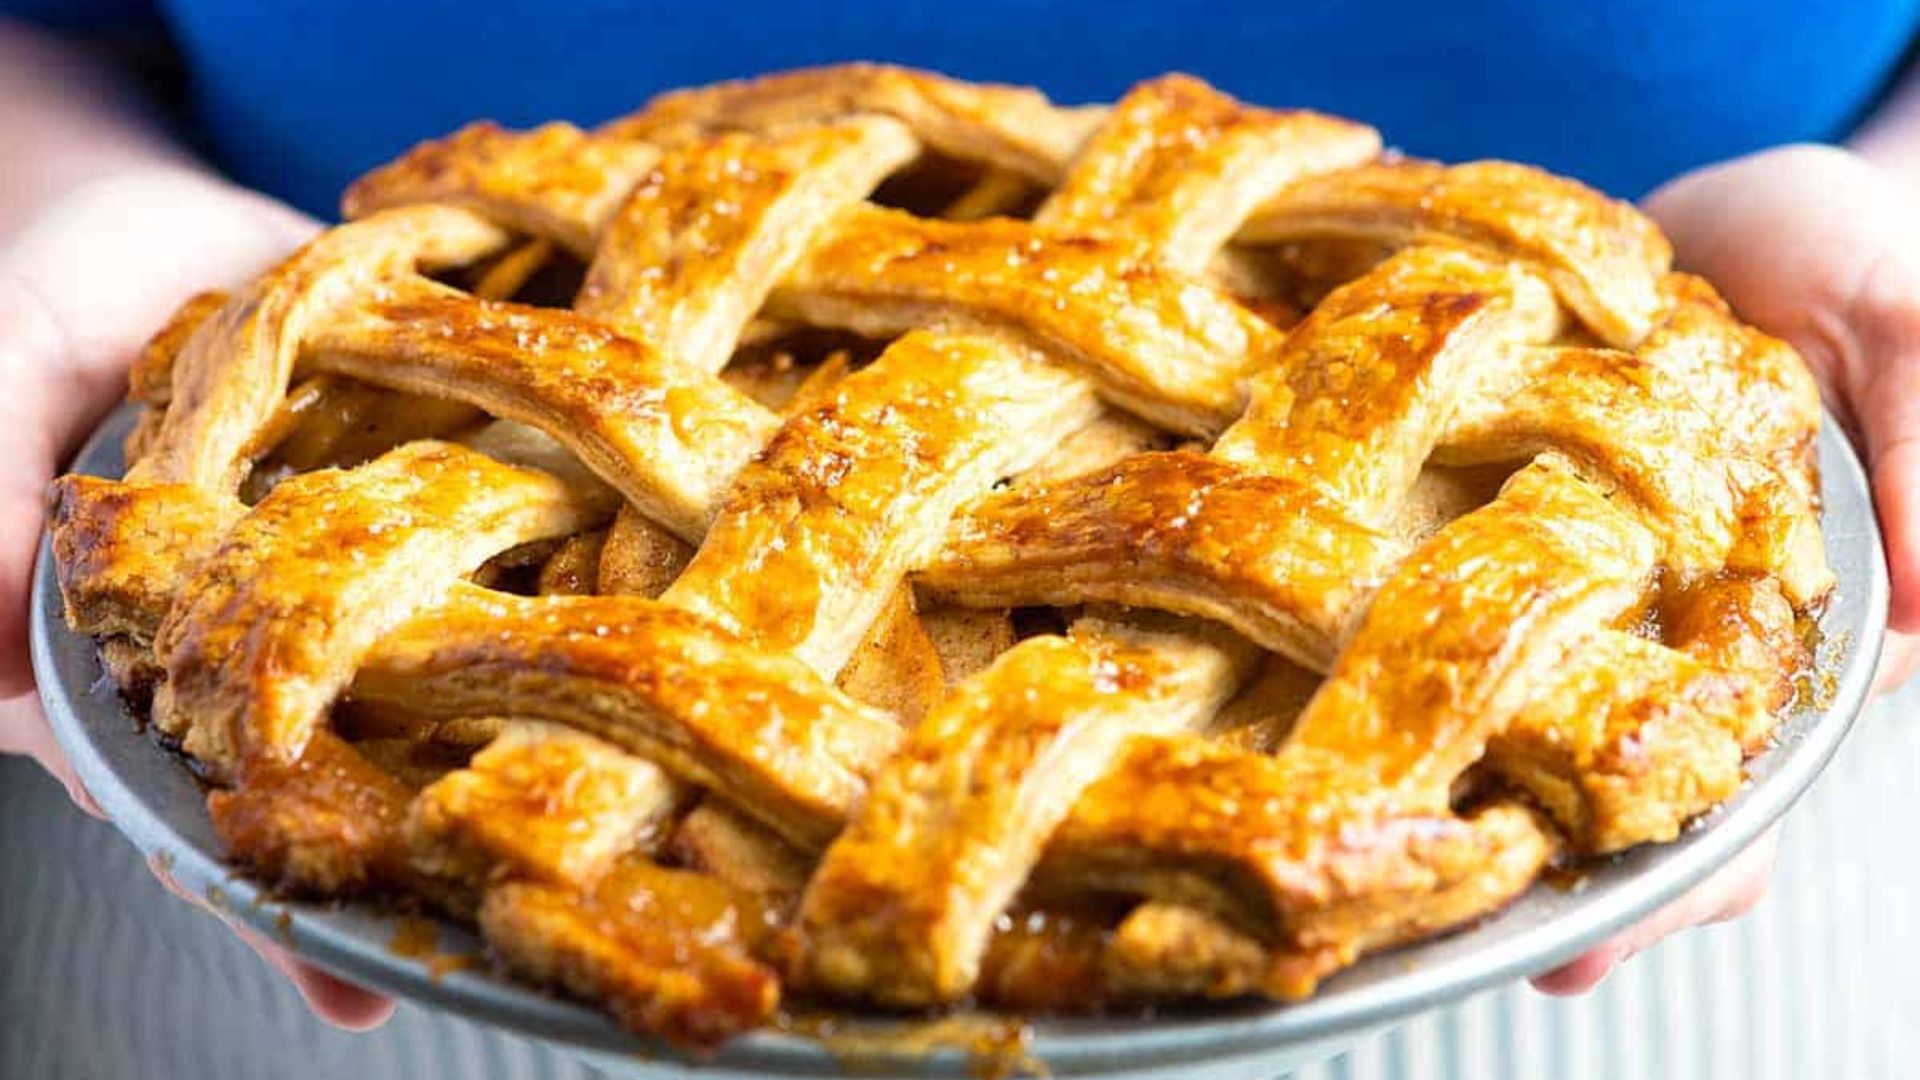 this image shows Apple pie